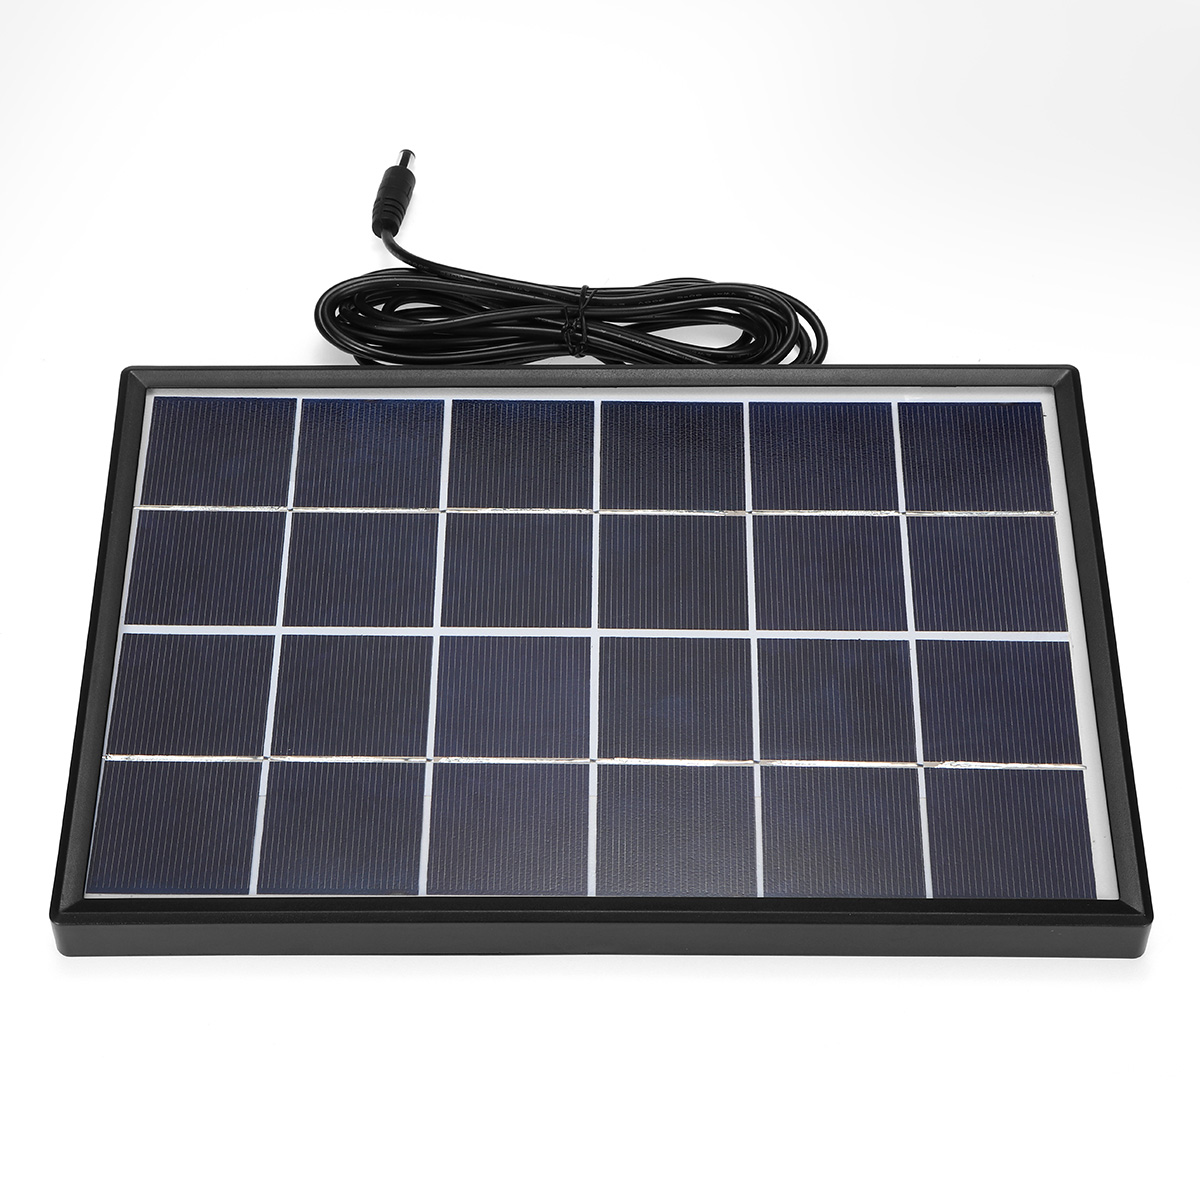 6W 6V 266*175*17mm Polysilicon Solar Panel with Cable & Border 10